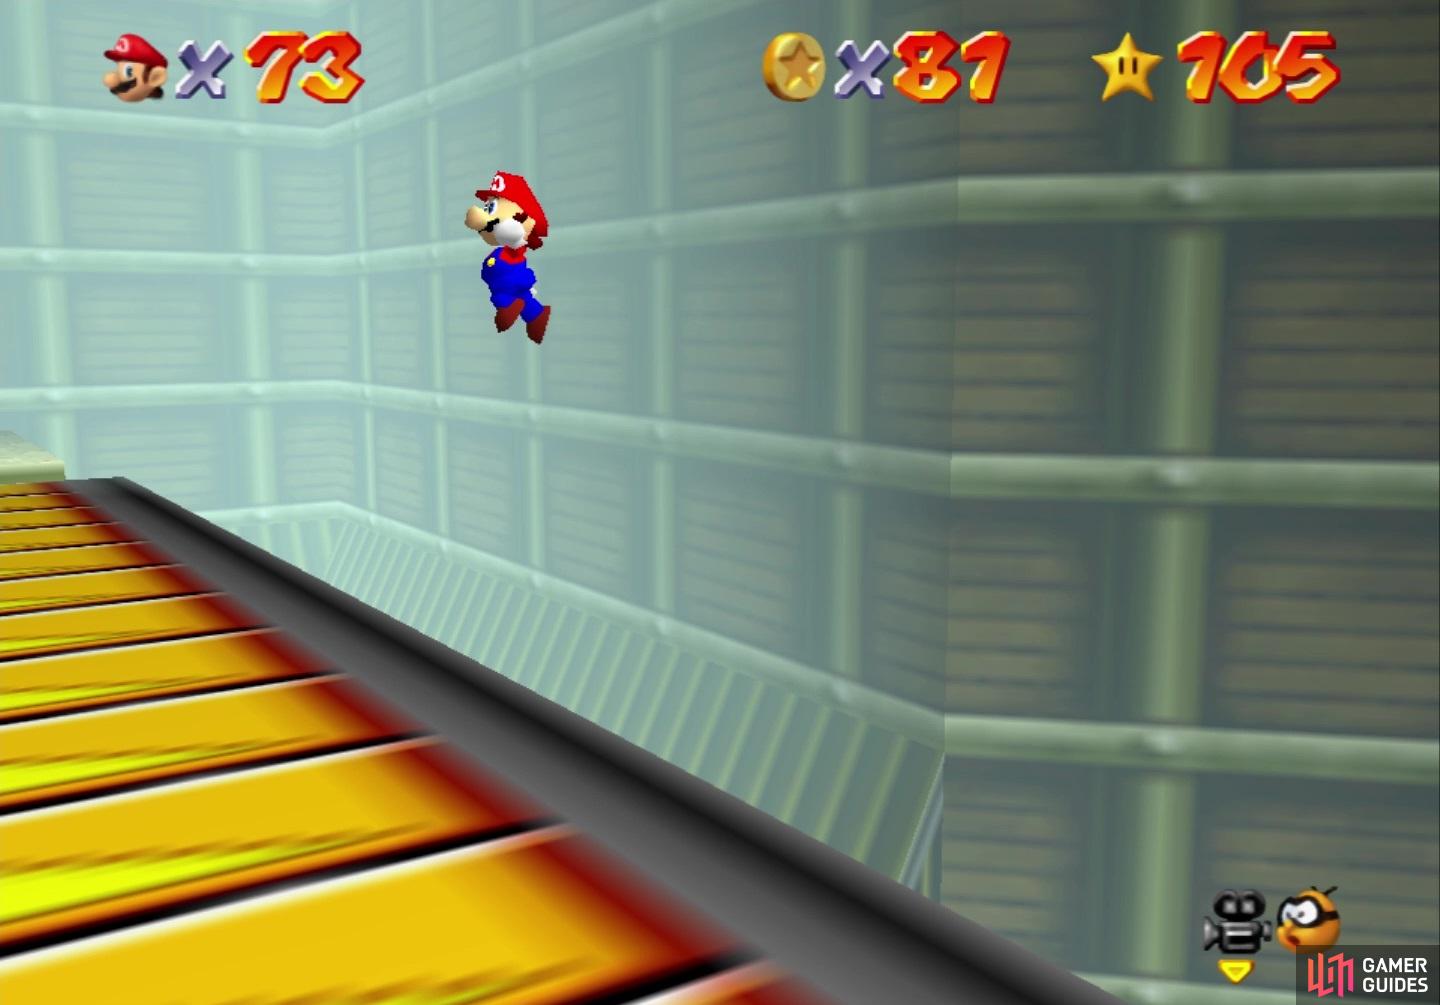 With time still, you will have to Triple Jump and Wall Jump to reach the conveyor